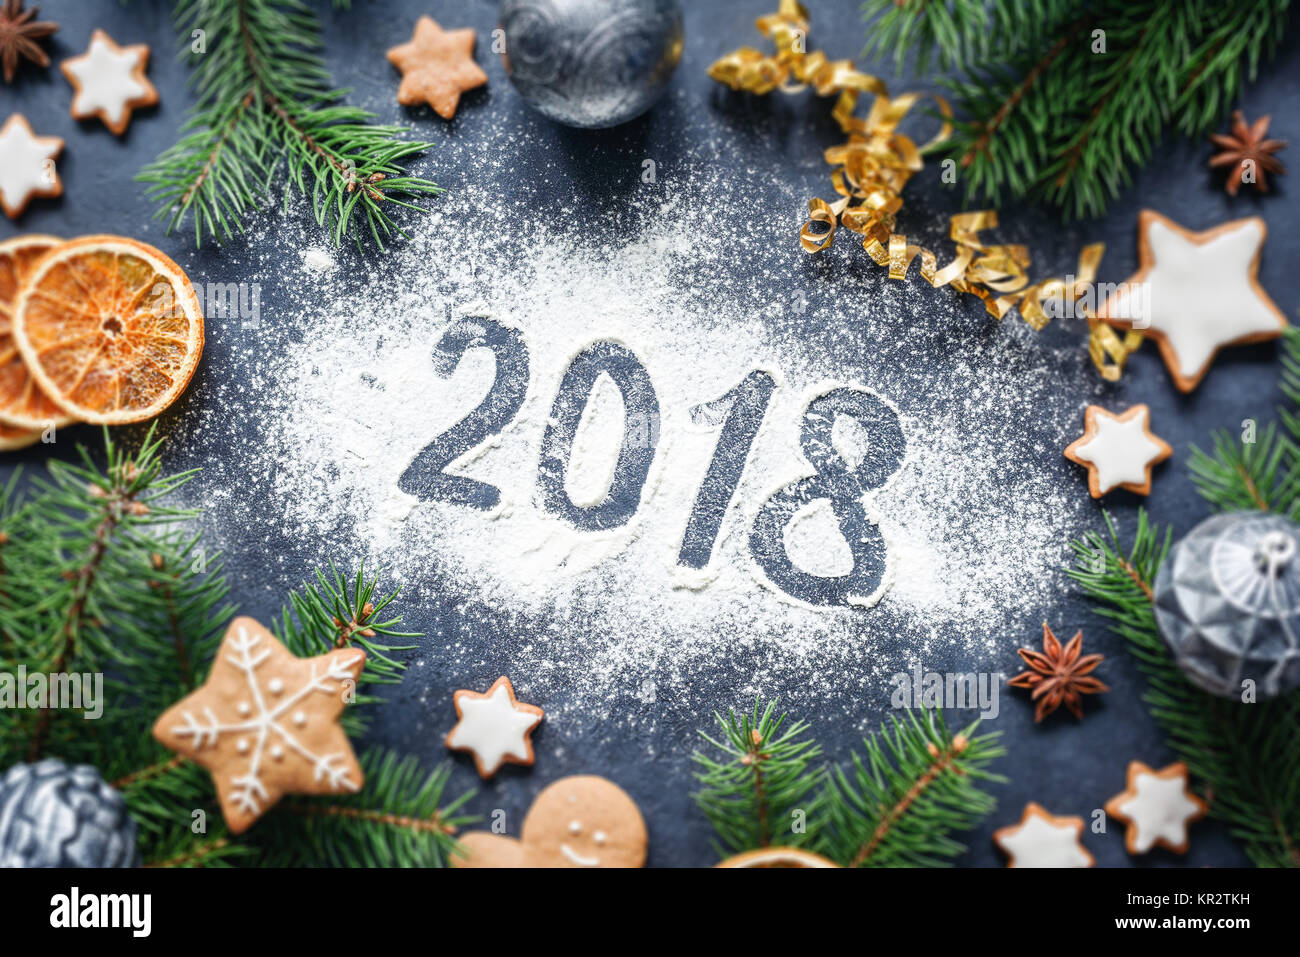 Happy New Year 2018 written on flour and Christmas Decorations Gingerbread cookies, cinnamon, oranges, spices, nuts and toys on concrete background. C Stock Photo